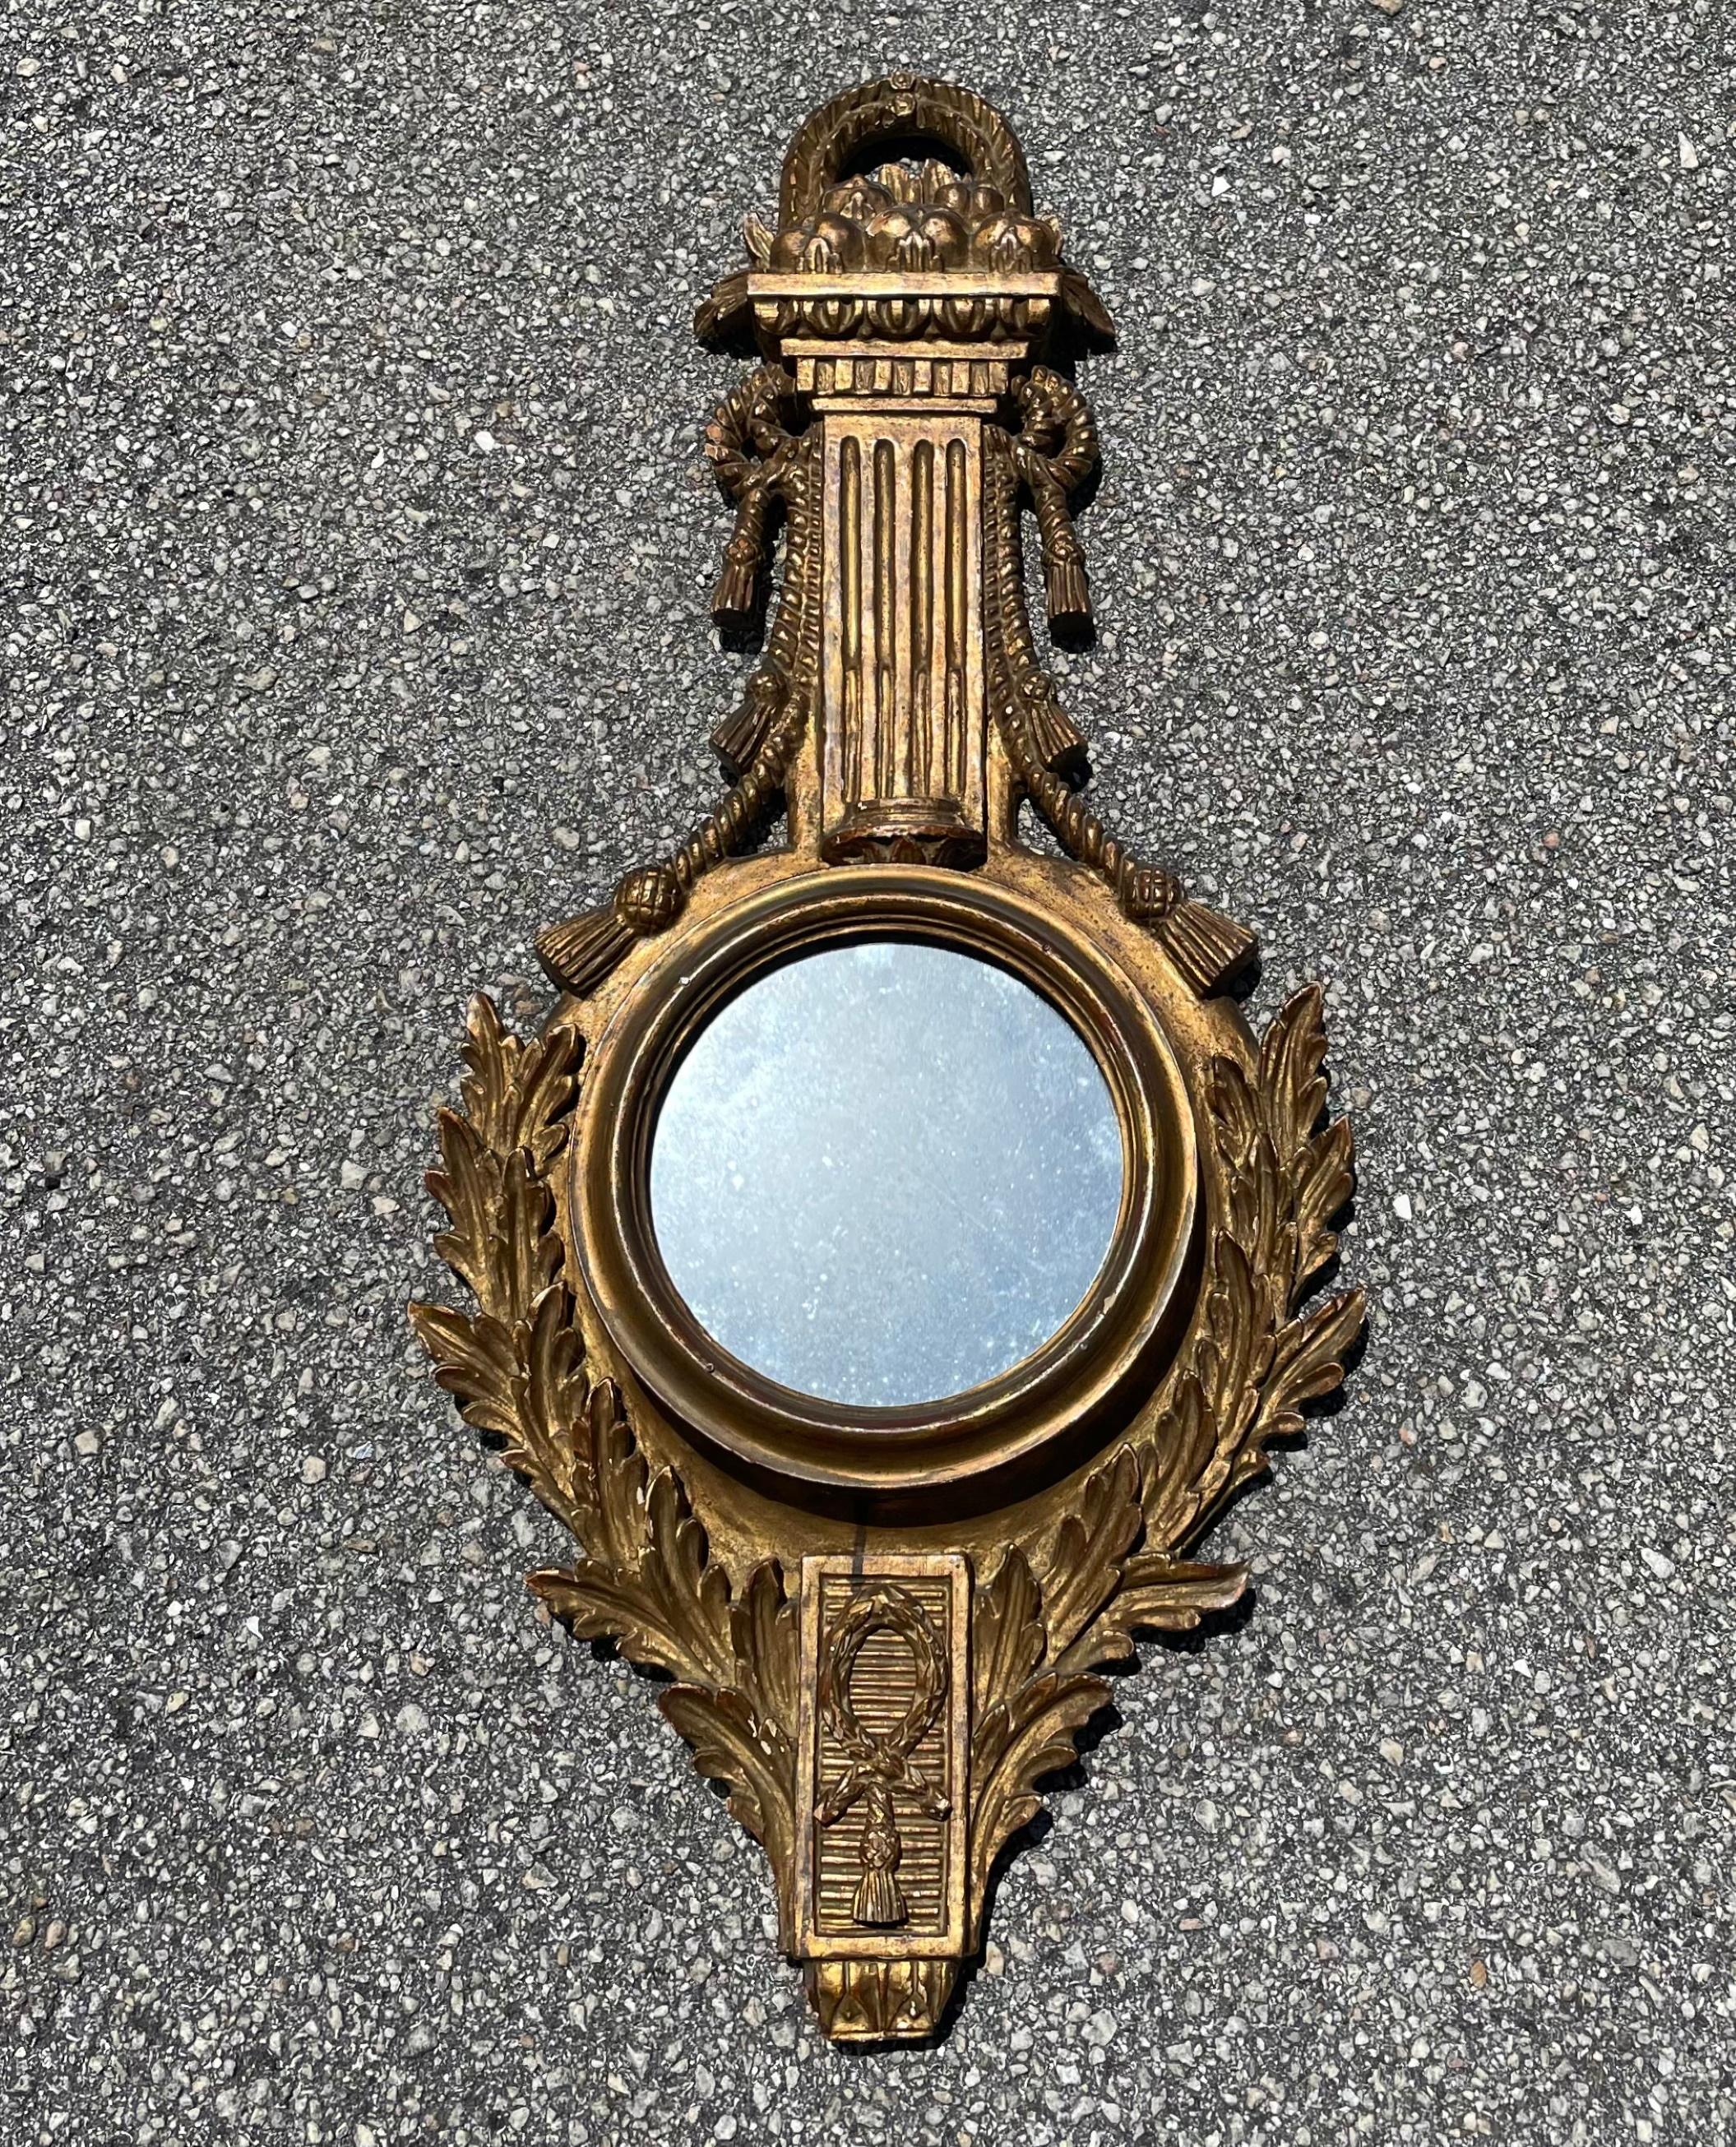 Highly decorative 19th century French Baroque style Barometer case mirror.

Repurposed barometer wall hanging case of the 19th century now houses a circular mirror. The glorious patinated giltwood Baroque style case is hand carved in Fine detail